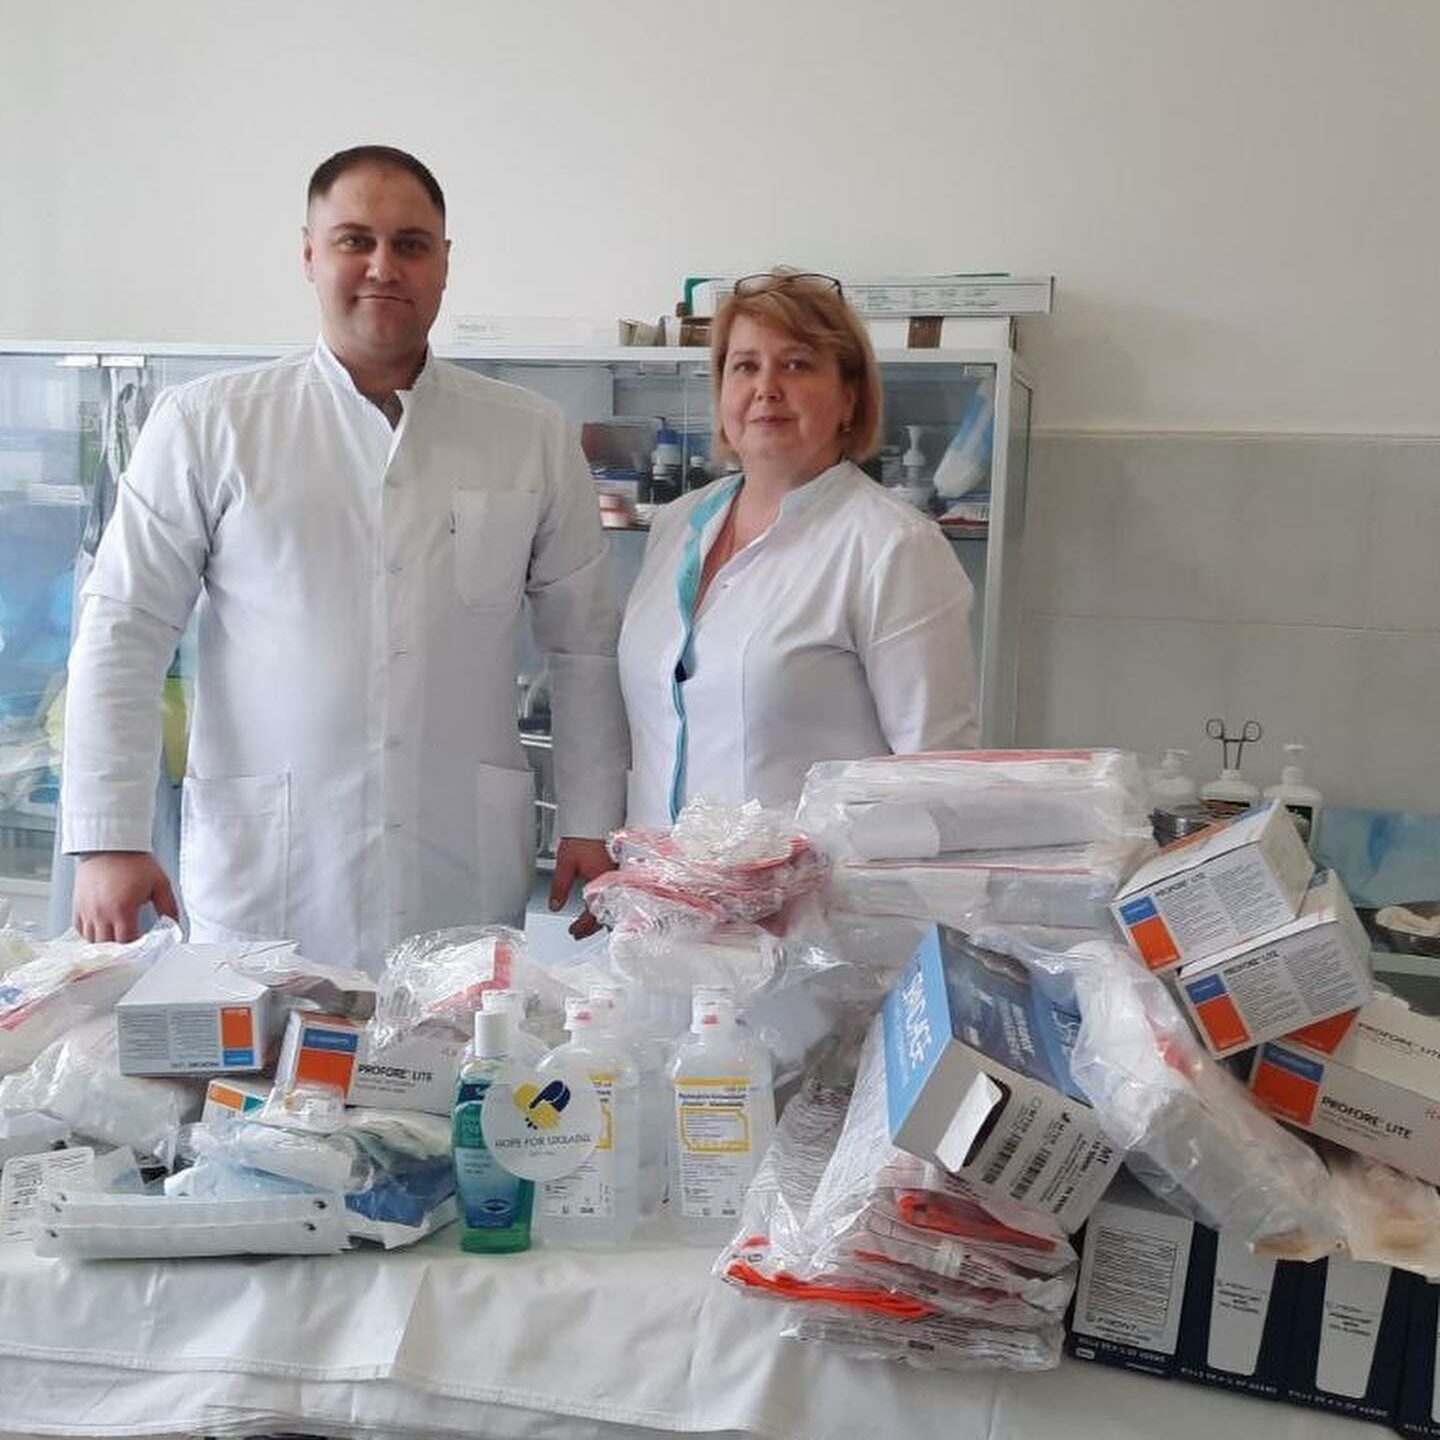 a man and a woman standing next to a table full of medical supplies.